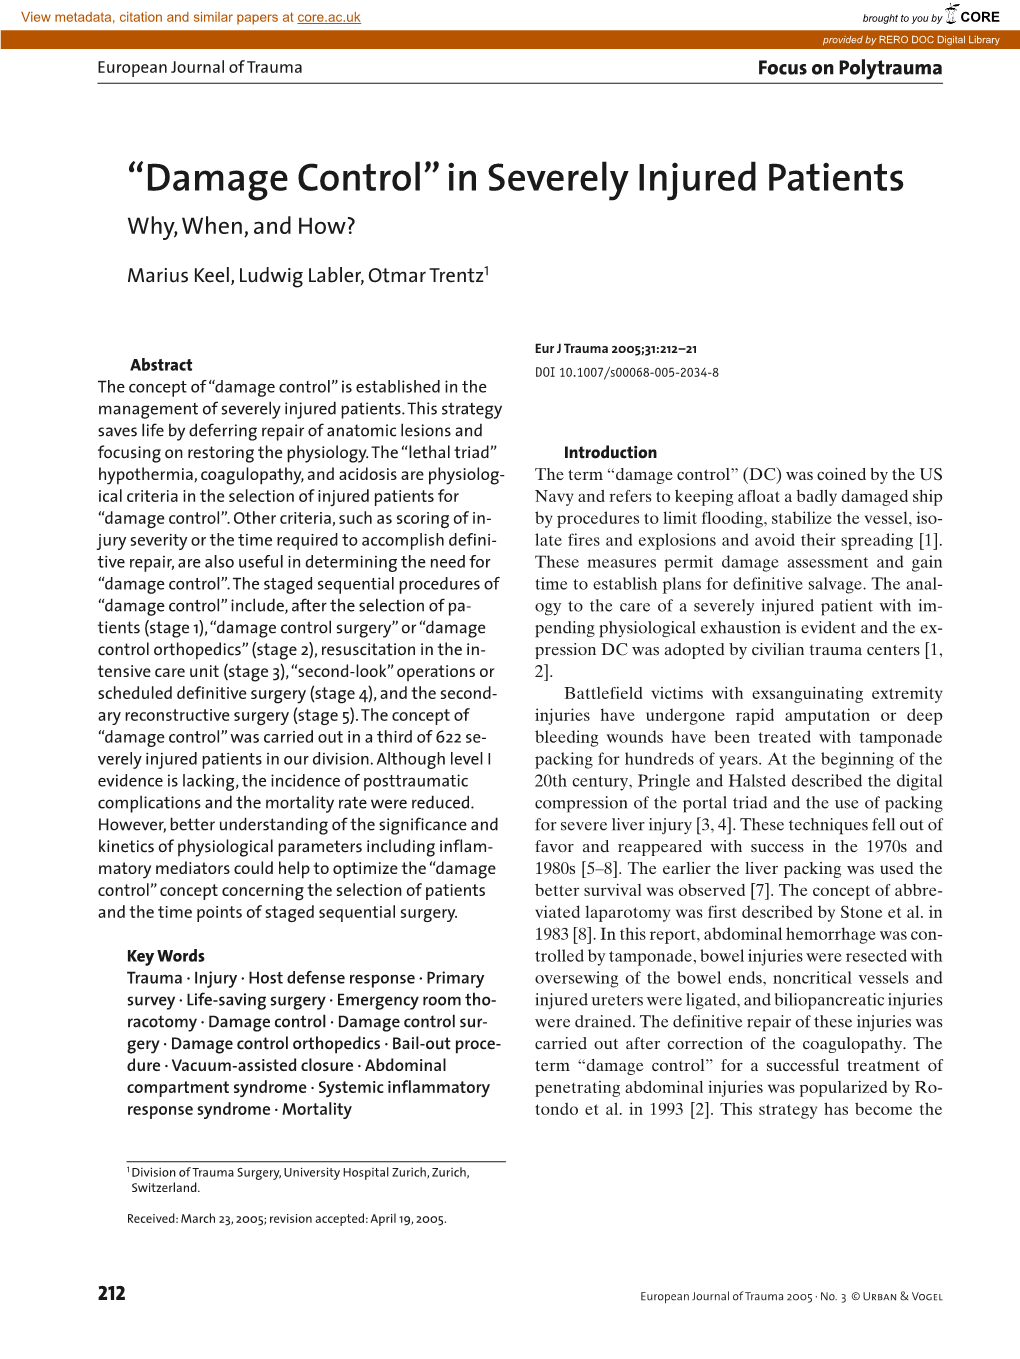 “Damage Control” in Severely Injured Patients Why, When, and How?